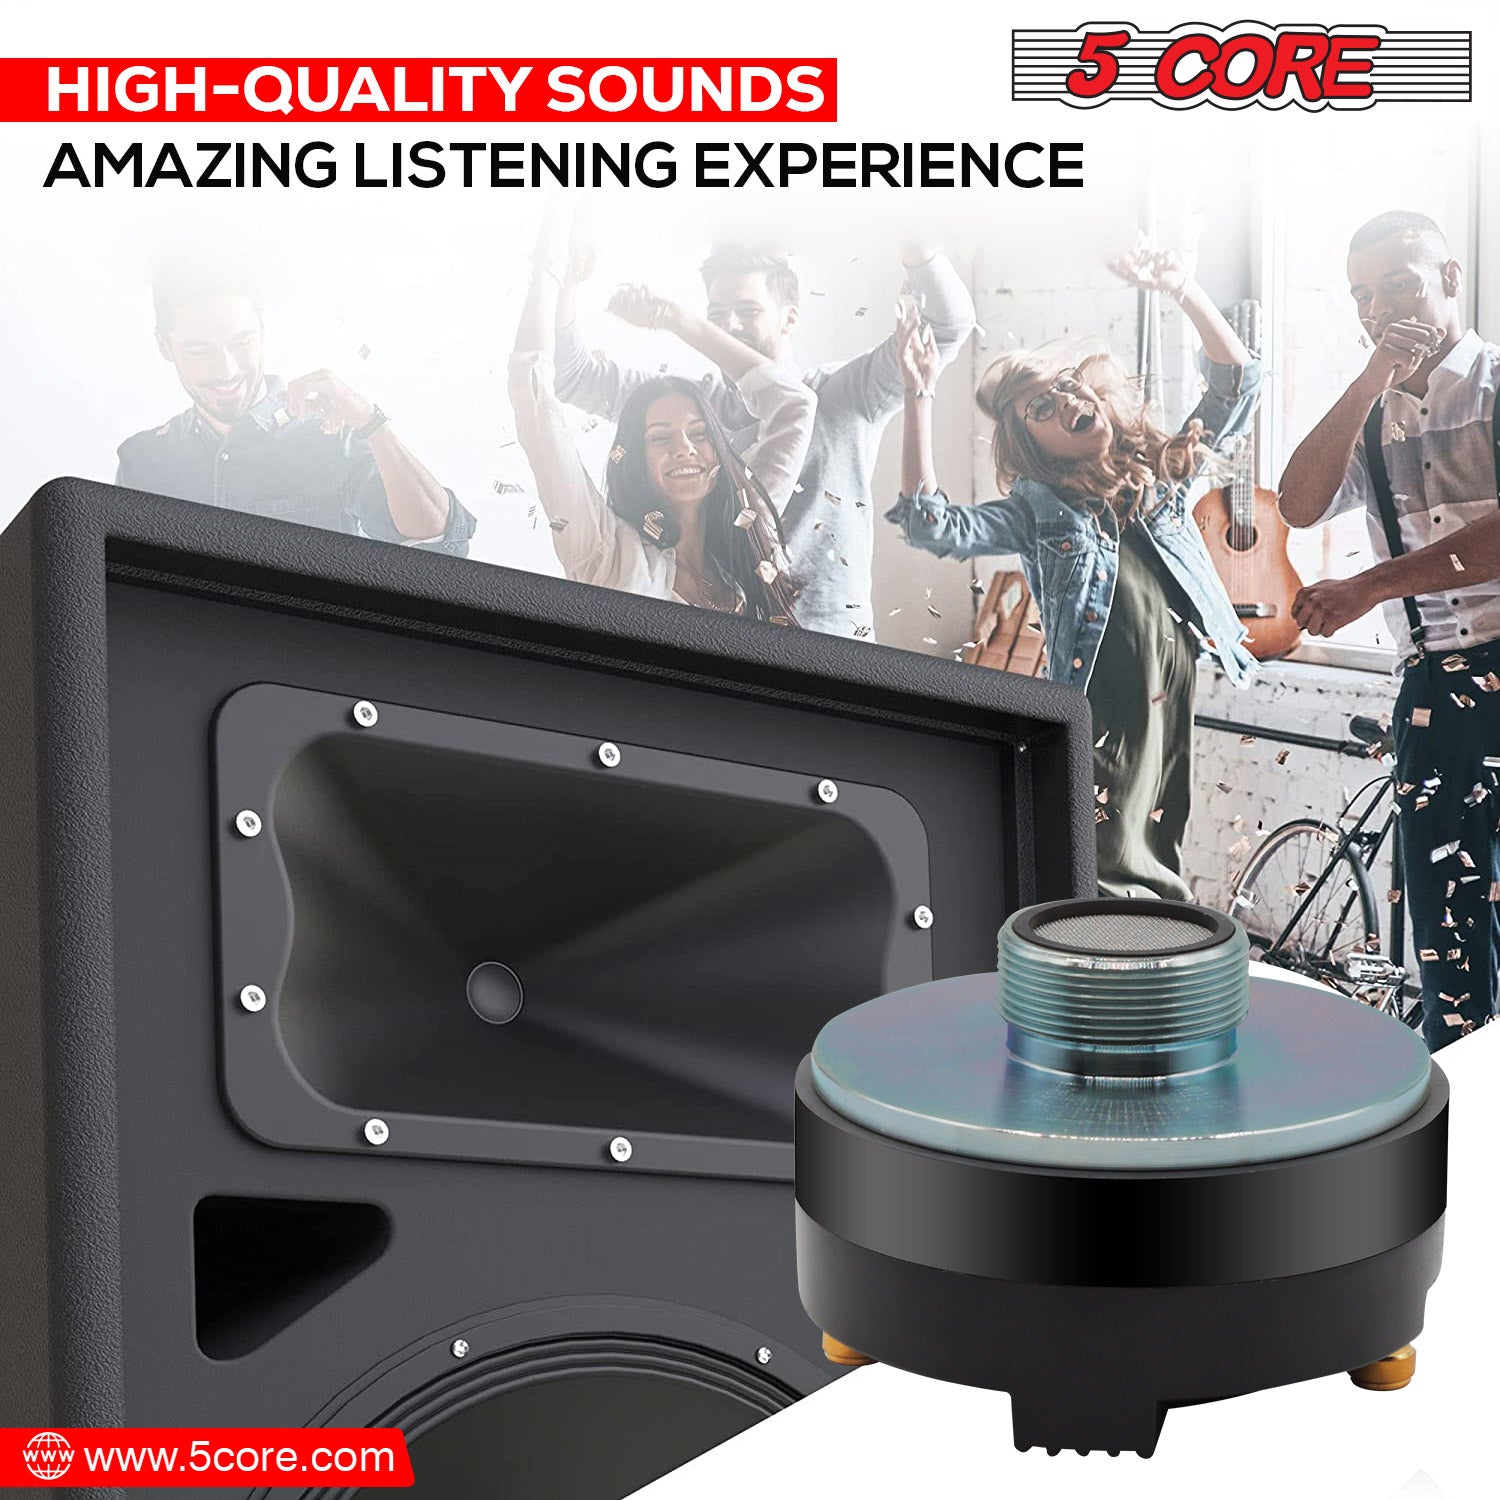 5 Core Tweeter horn compression driver high quality sounds amazing listening experience.